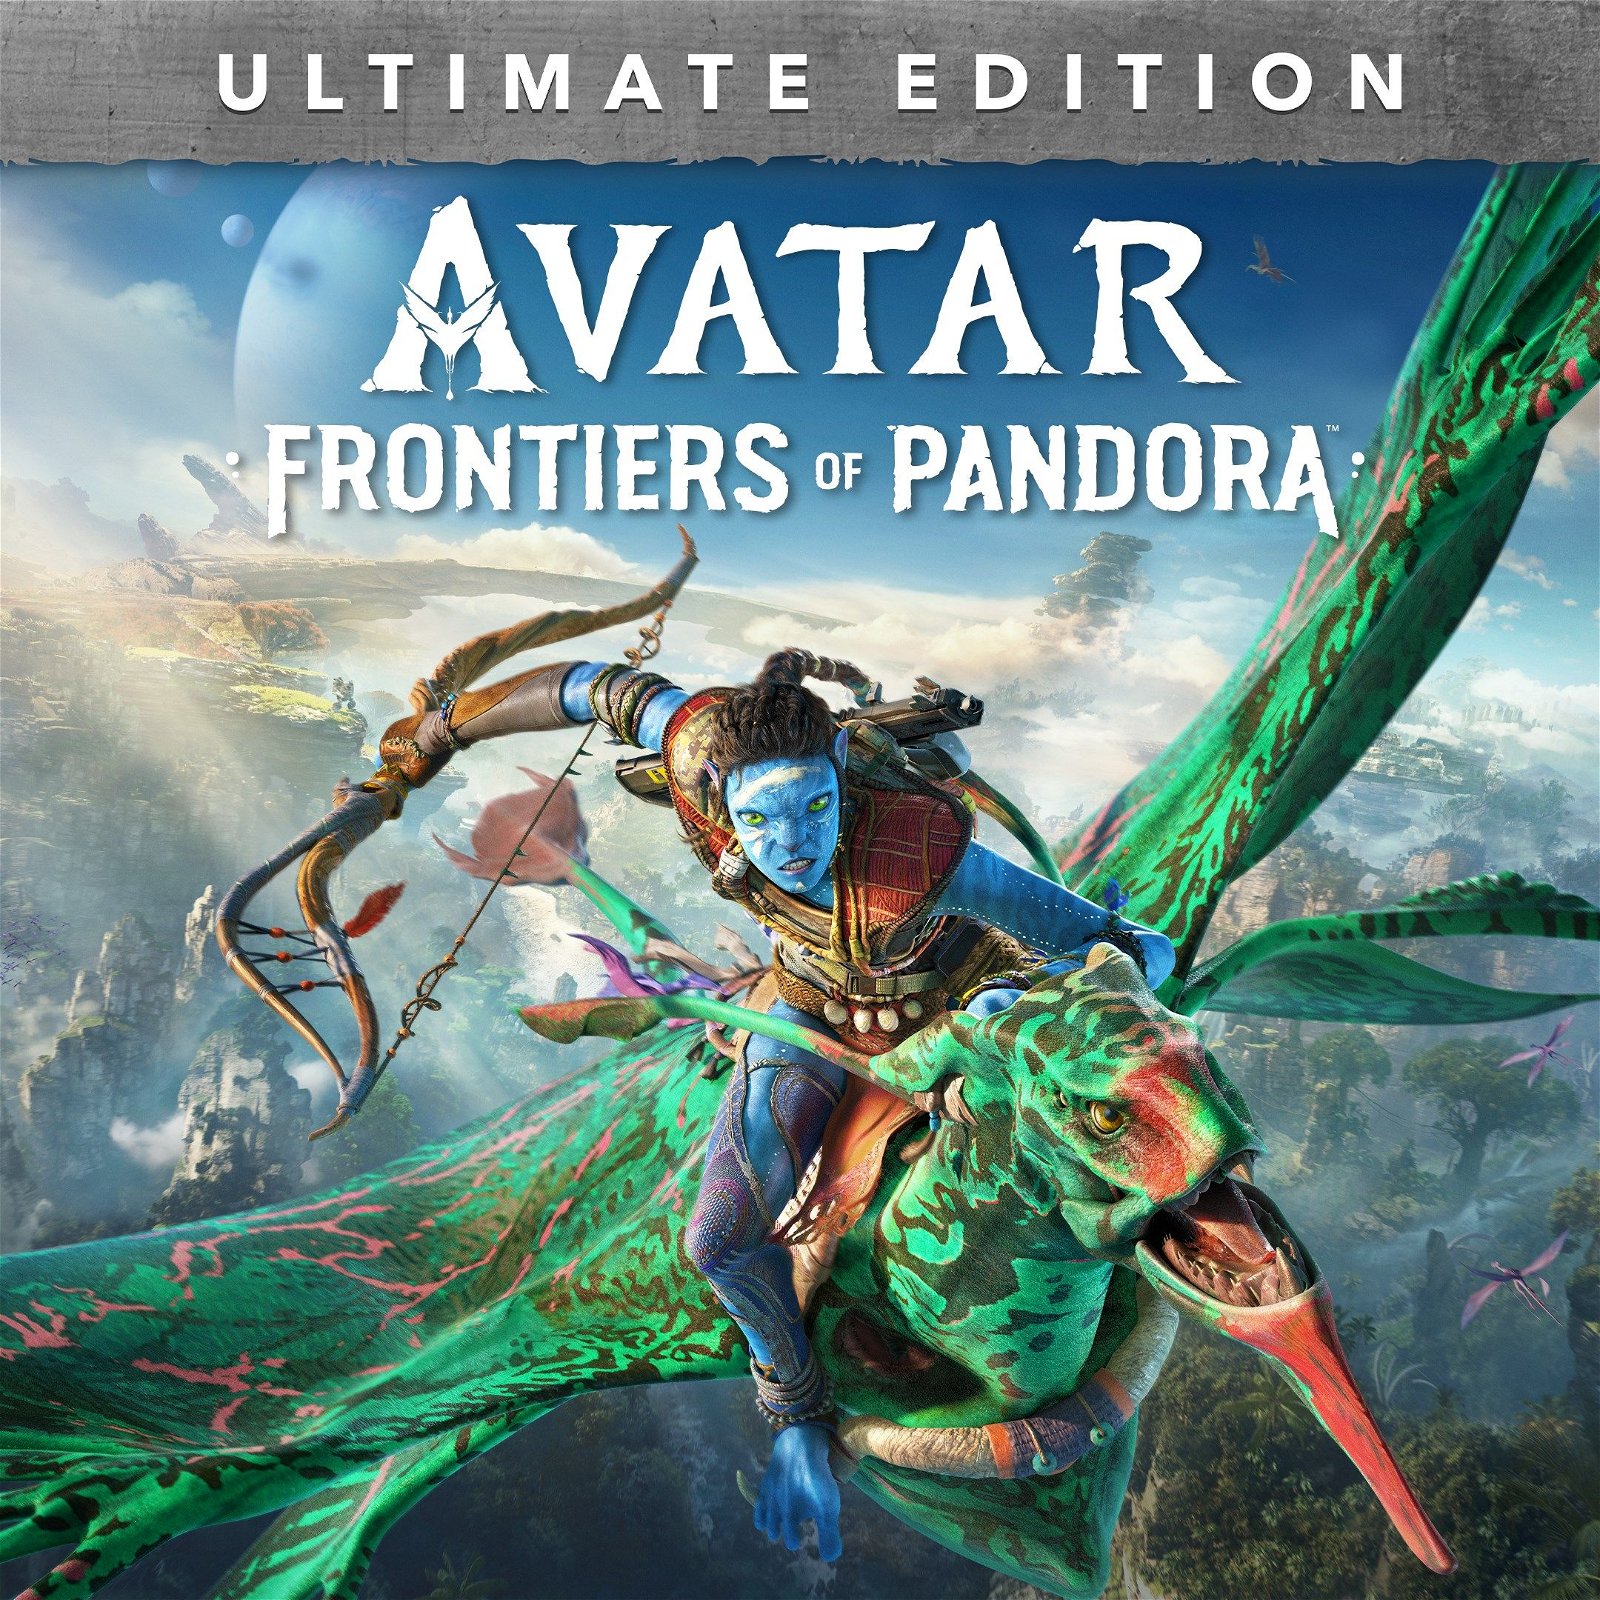 Image of Avatar: Frontiers of Pandora Ultimate Edition